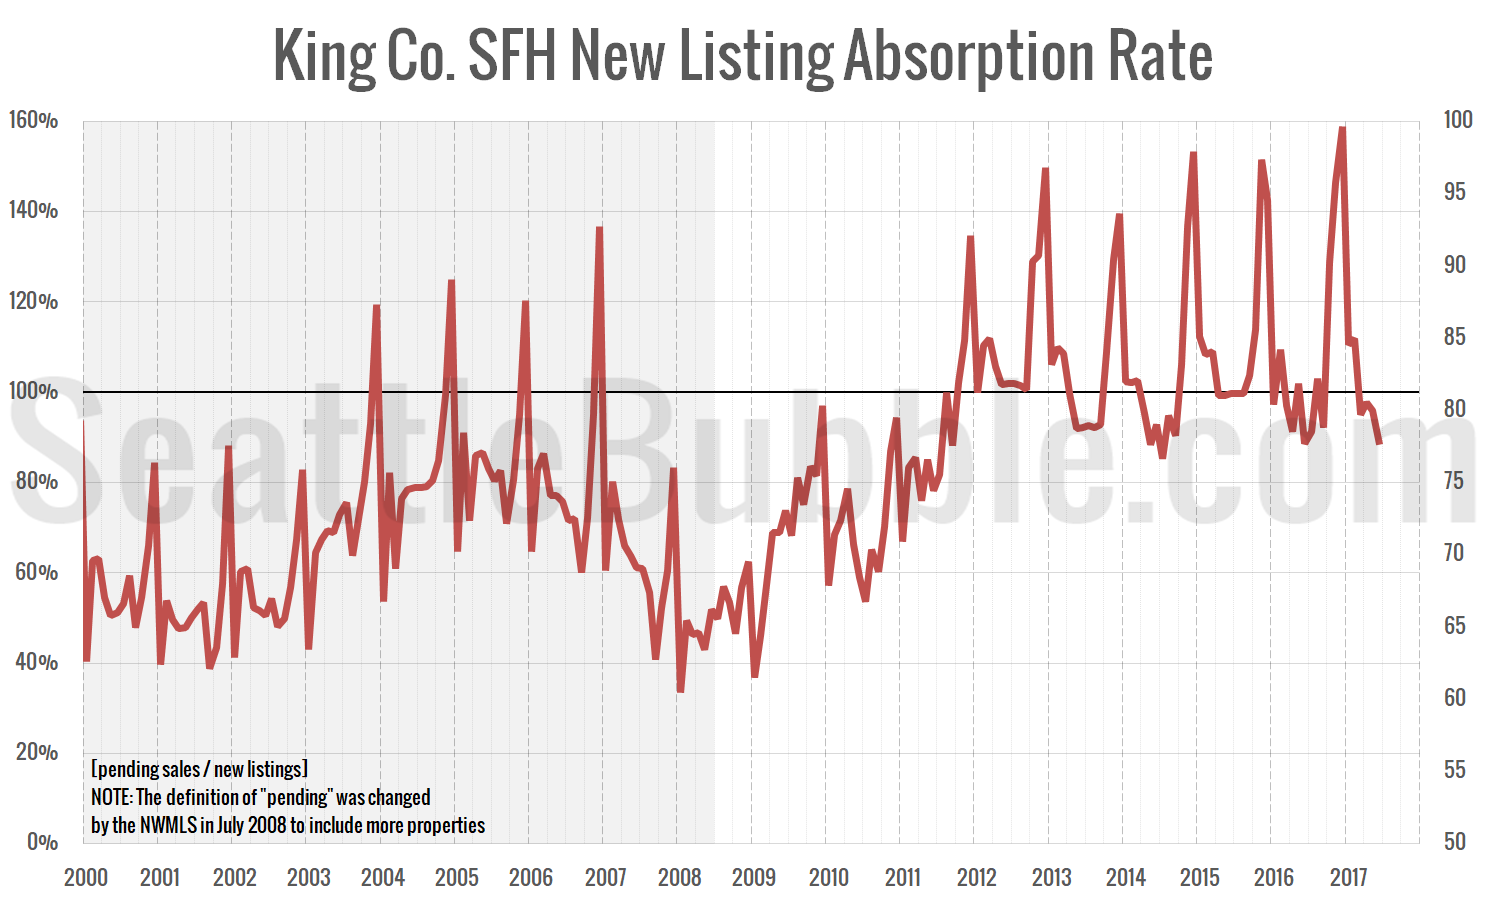 King Co. SFH New Listing Absorption Rate